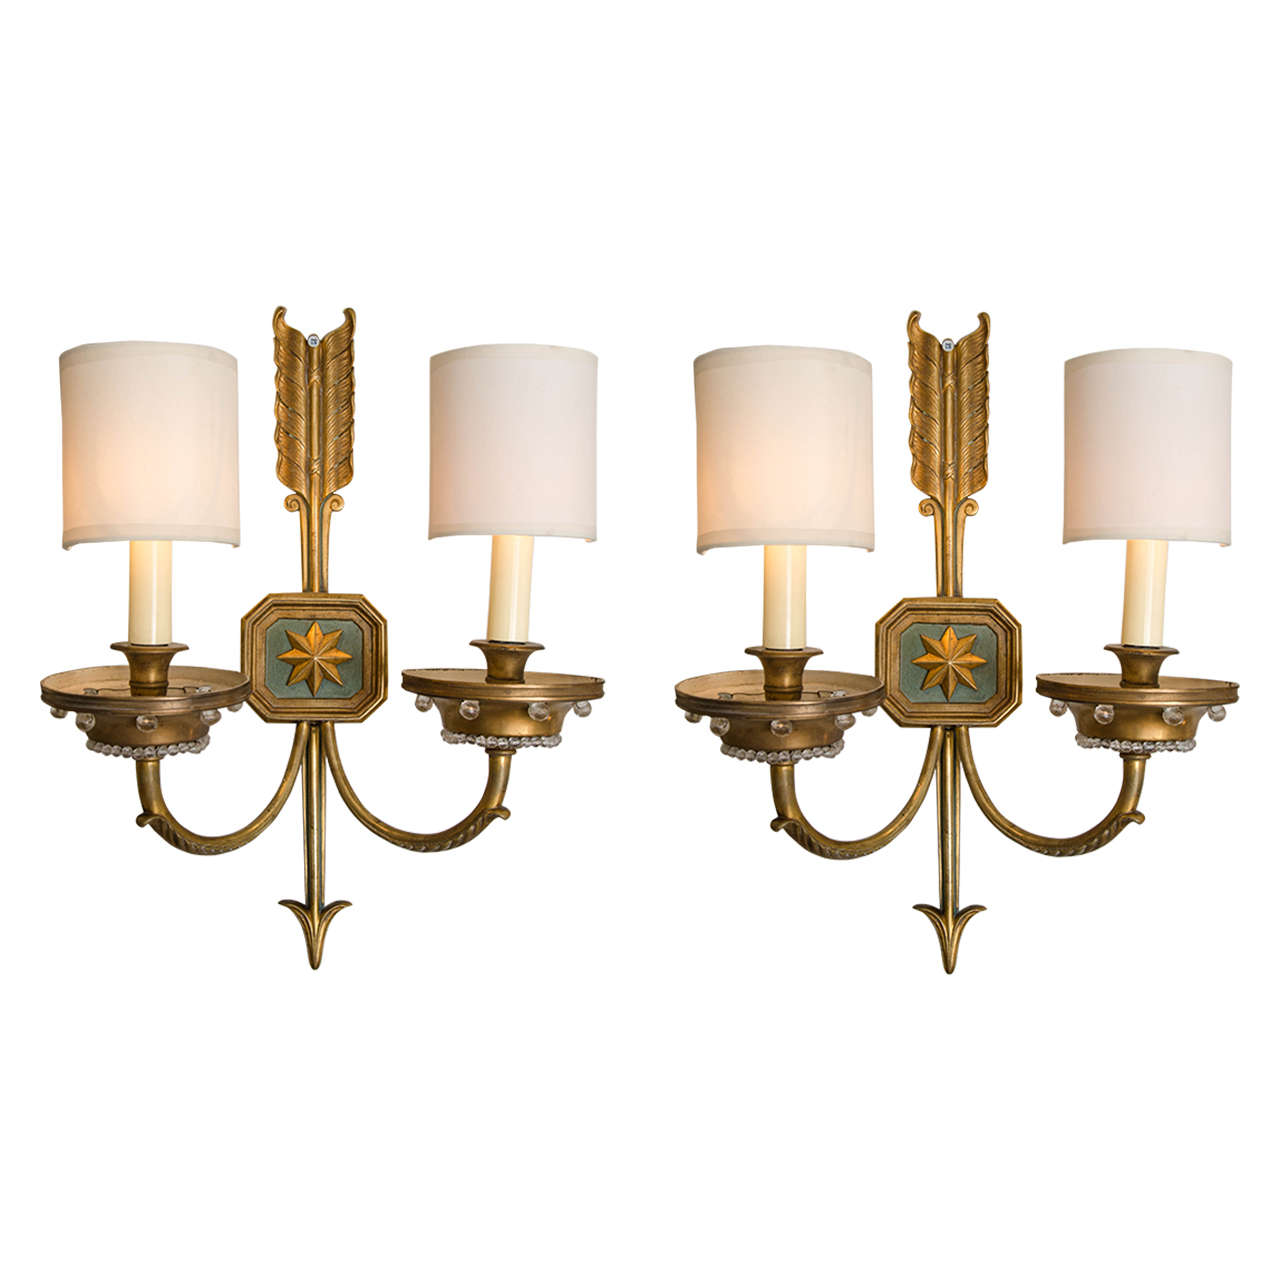 1930s French "Times Arrow" Wall Lights